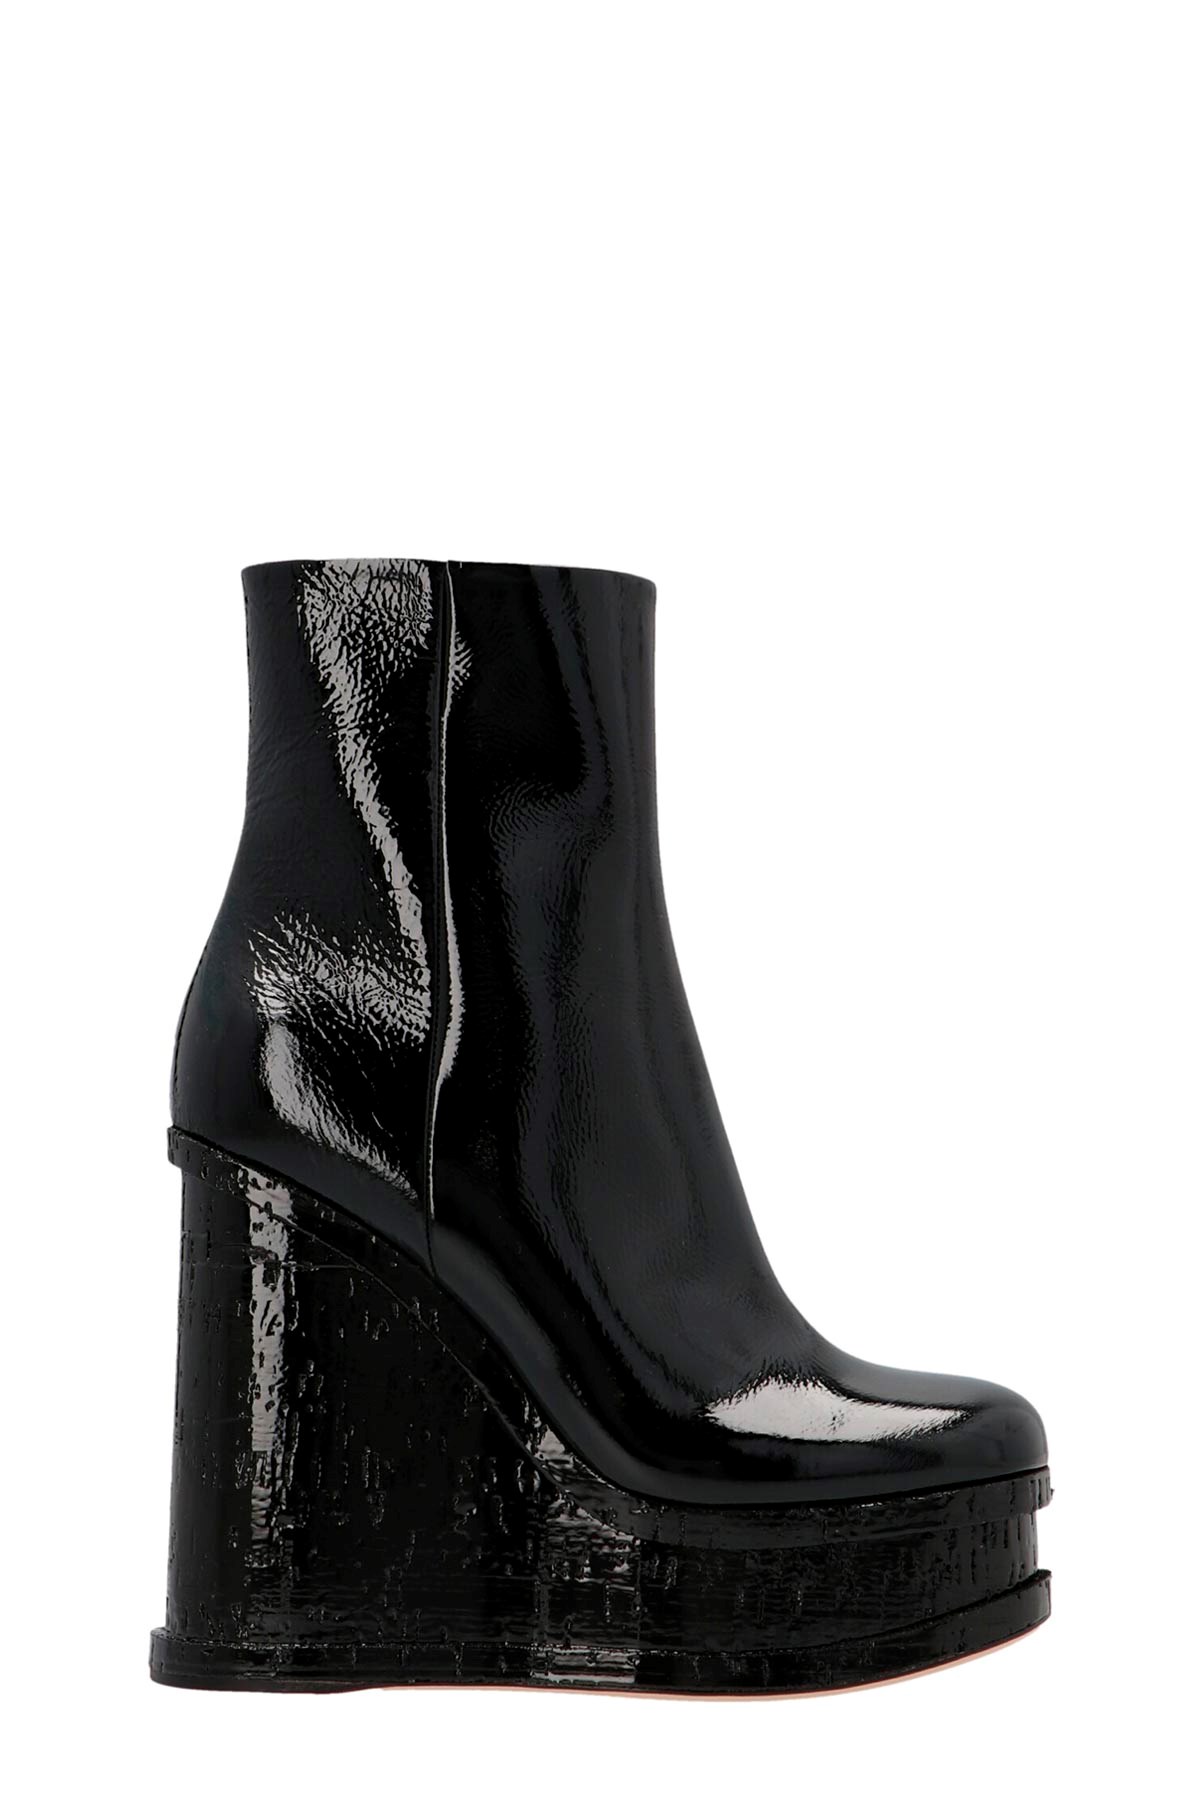 HAUS OF HONEY 'Lacquer Doll’ Ankle Boots